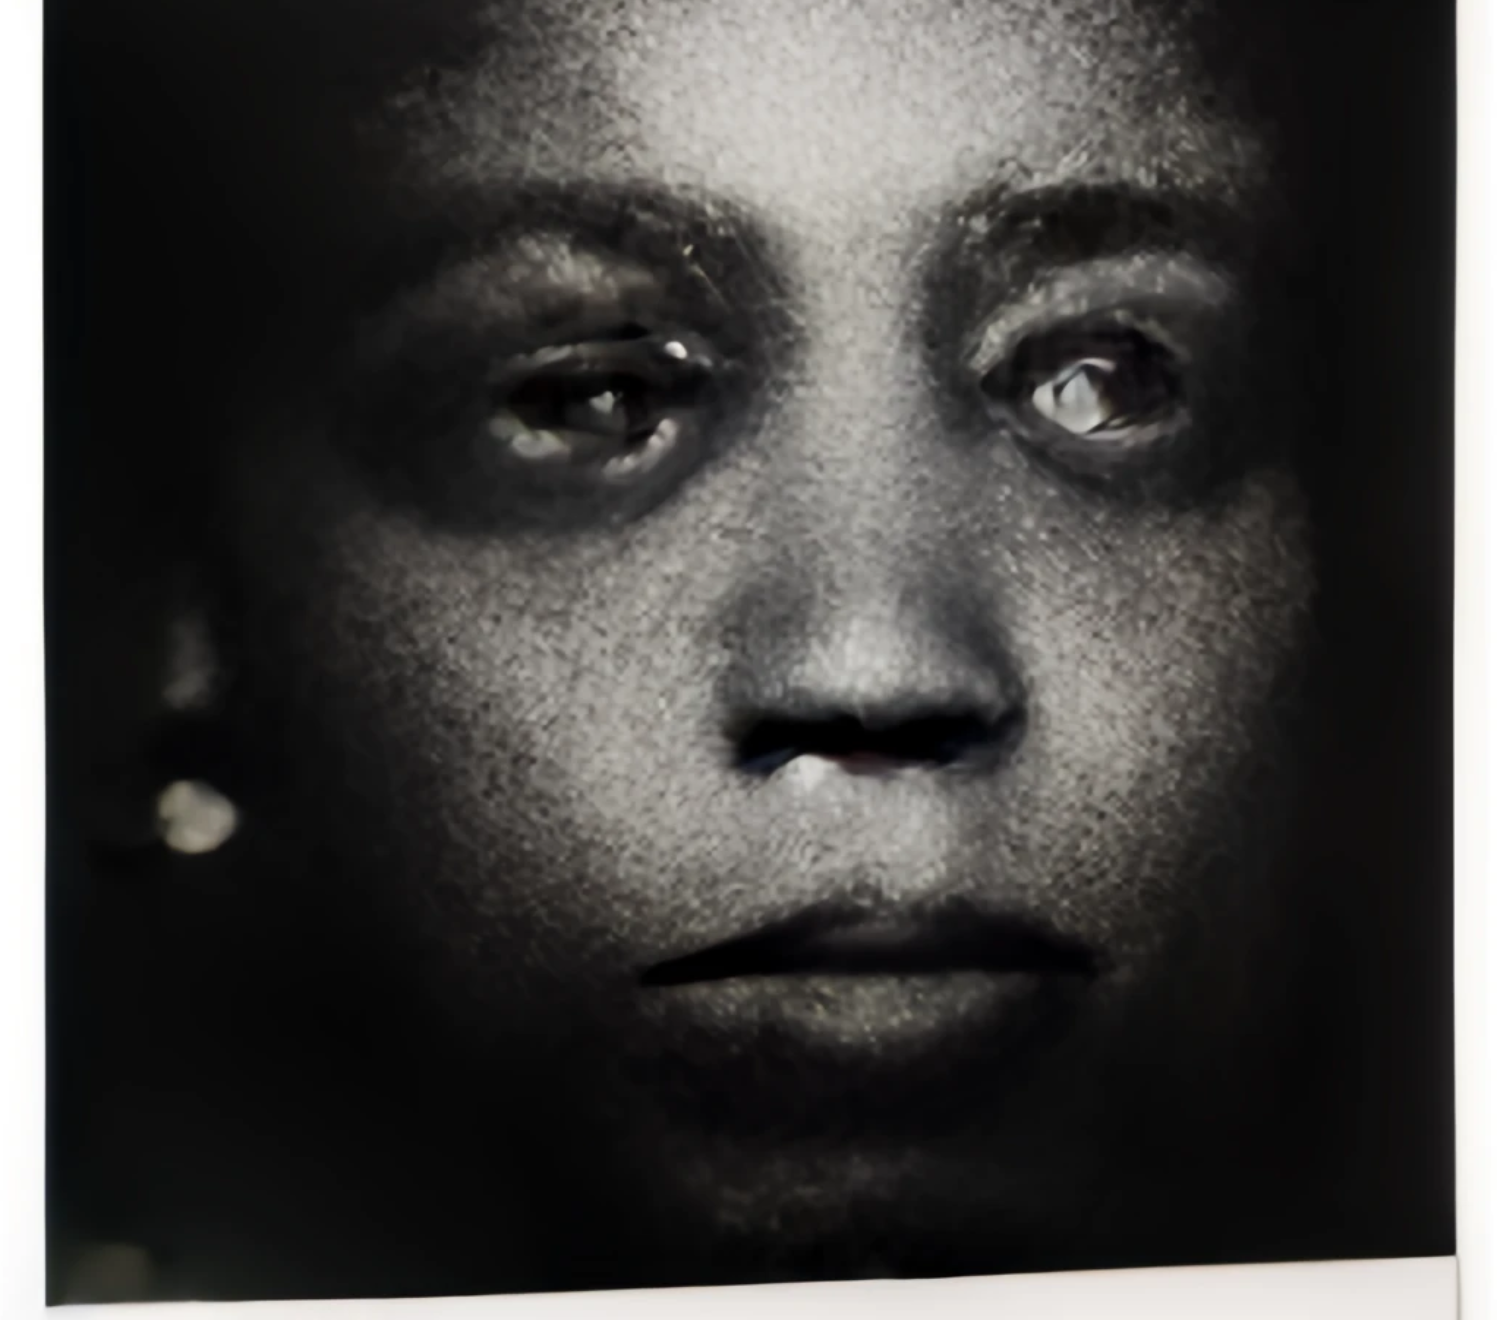 Black and white photo, with a thin slanted white border around the sides and bottom. Pictured is a youthful face, lit from above but receding into the darkness. They have full eyebrows, dark eyes, a flat, wide nose, and full, downturned lips. Their expression is stoic, but their eyes are weltered by the AI generator, giving them a tearful, swollen appearance. Although their eyes are marred, their gaze lands distinctly to the views right. Their skin has a cross hatched or scales texture. An earring in their right ear is dimly visible.